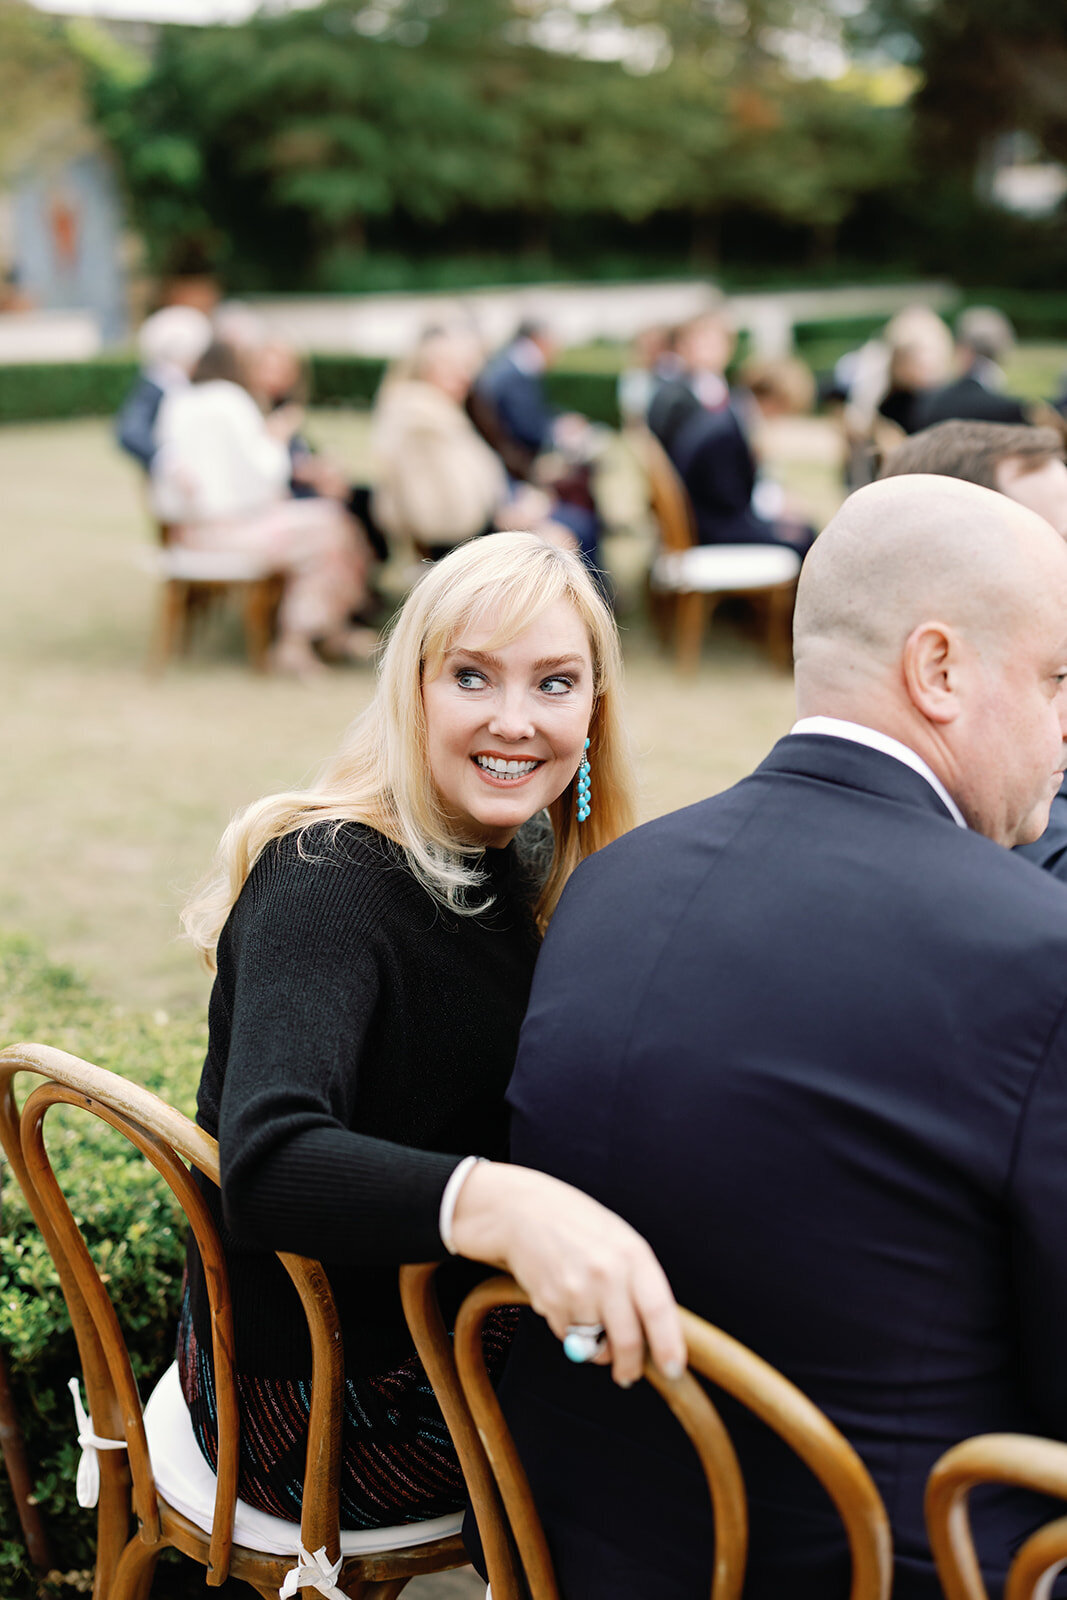 austin-wedding-commodore-perry-estate-julie-wilhite-photography-7